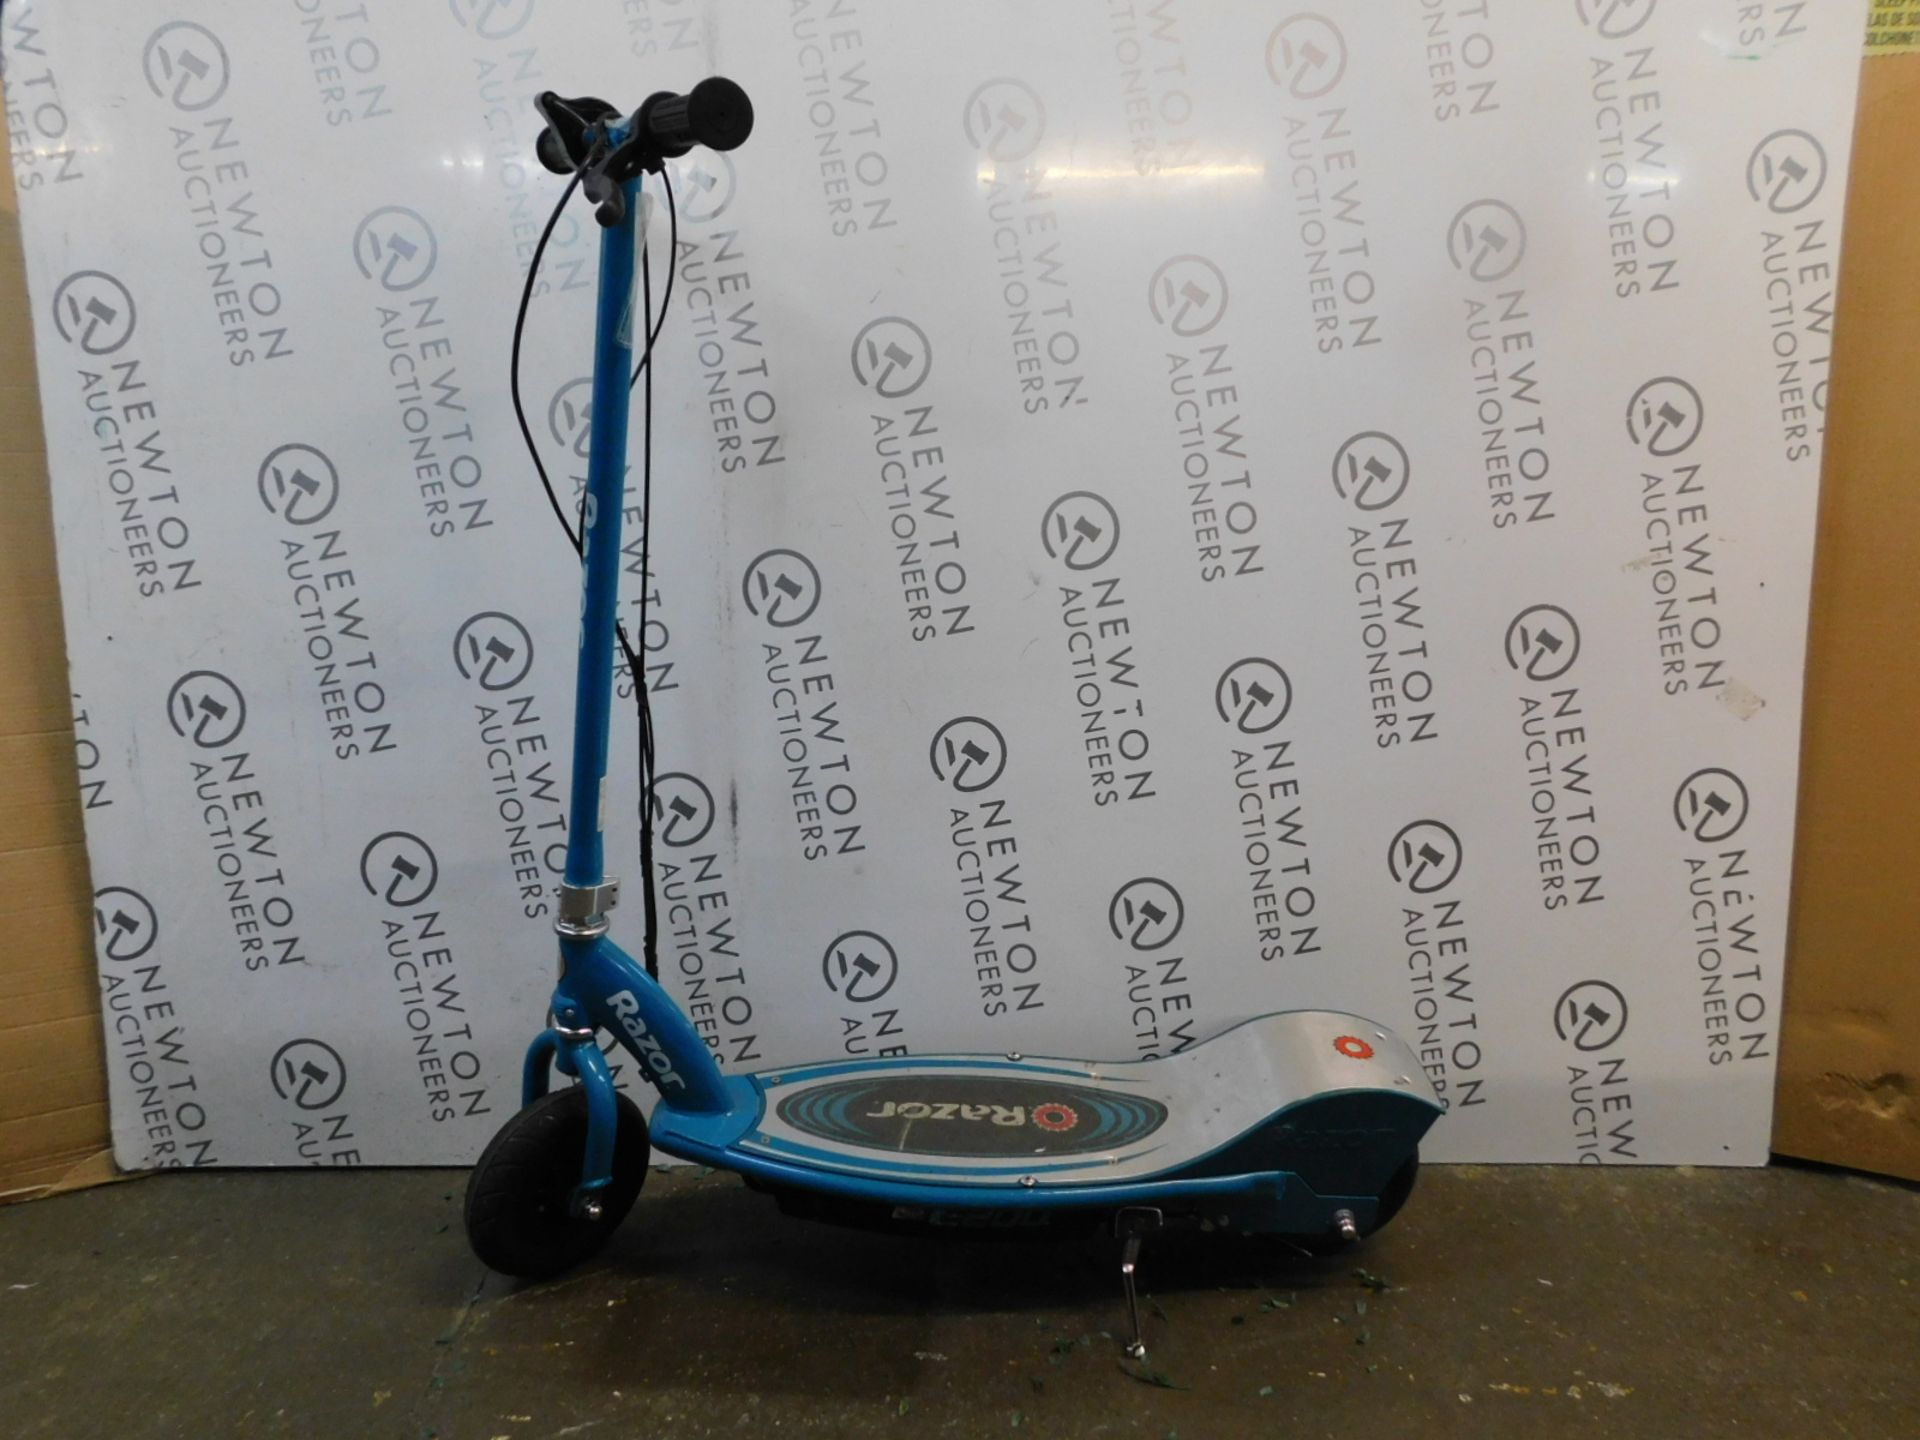 1 RAZOR POWER CORE E200 BLUE ELECTRIC SCOOTER RRP Â£239.99 (NO CHARGER, 1 CUT CABLE)